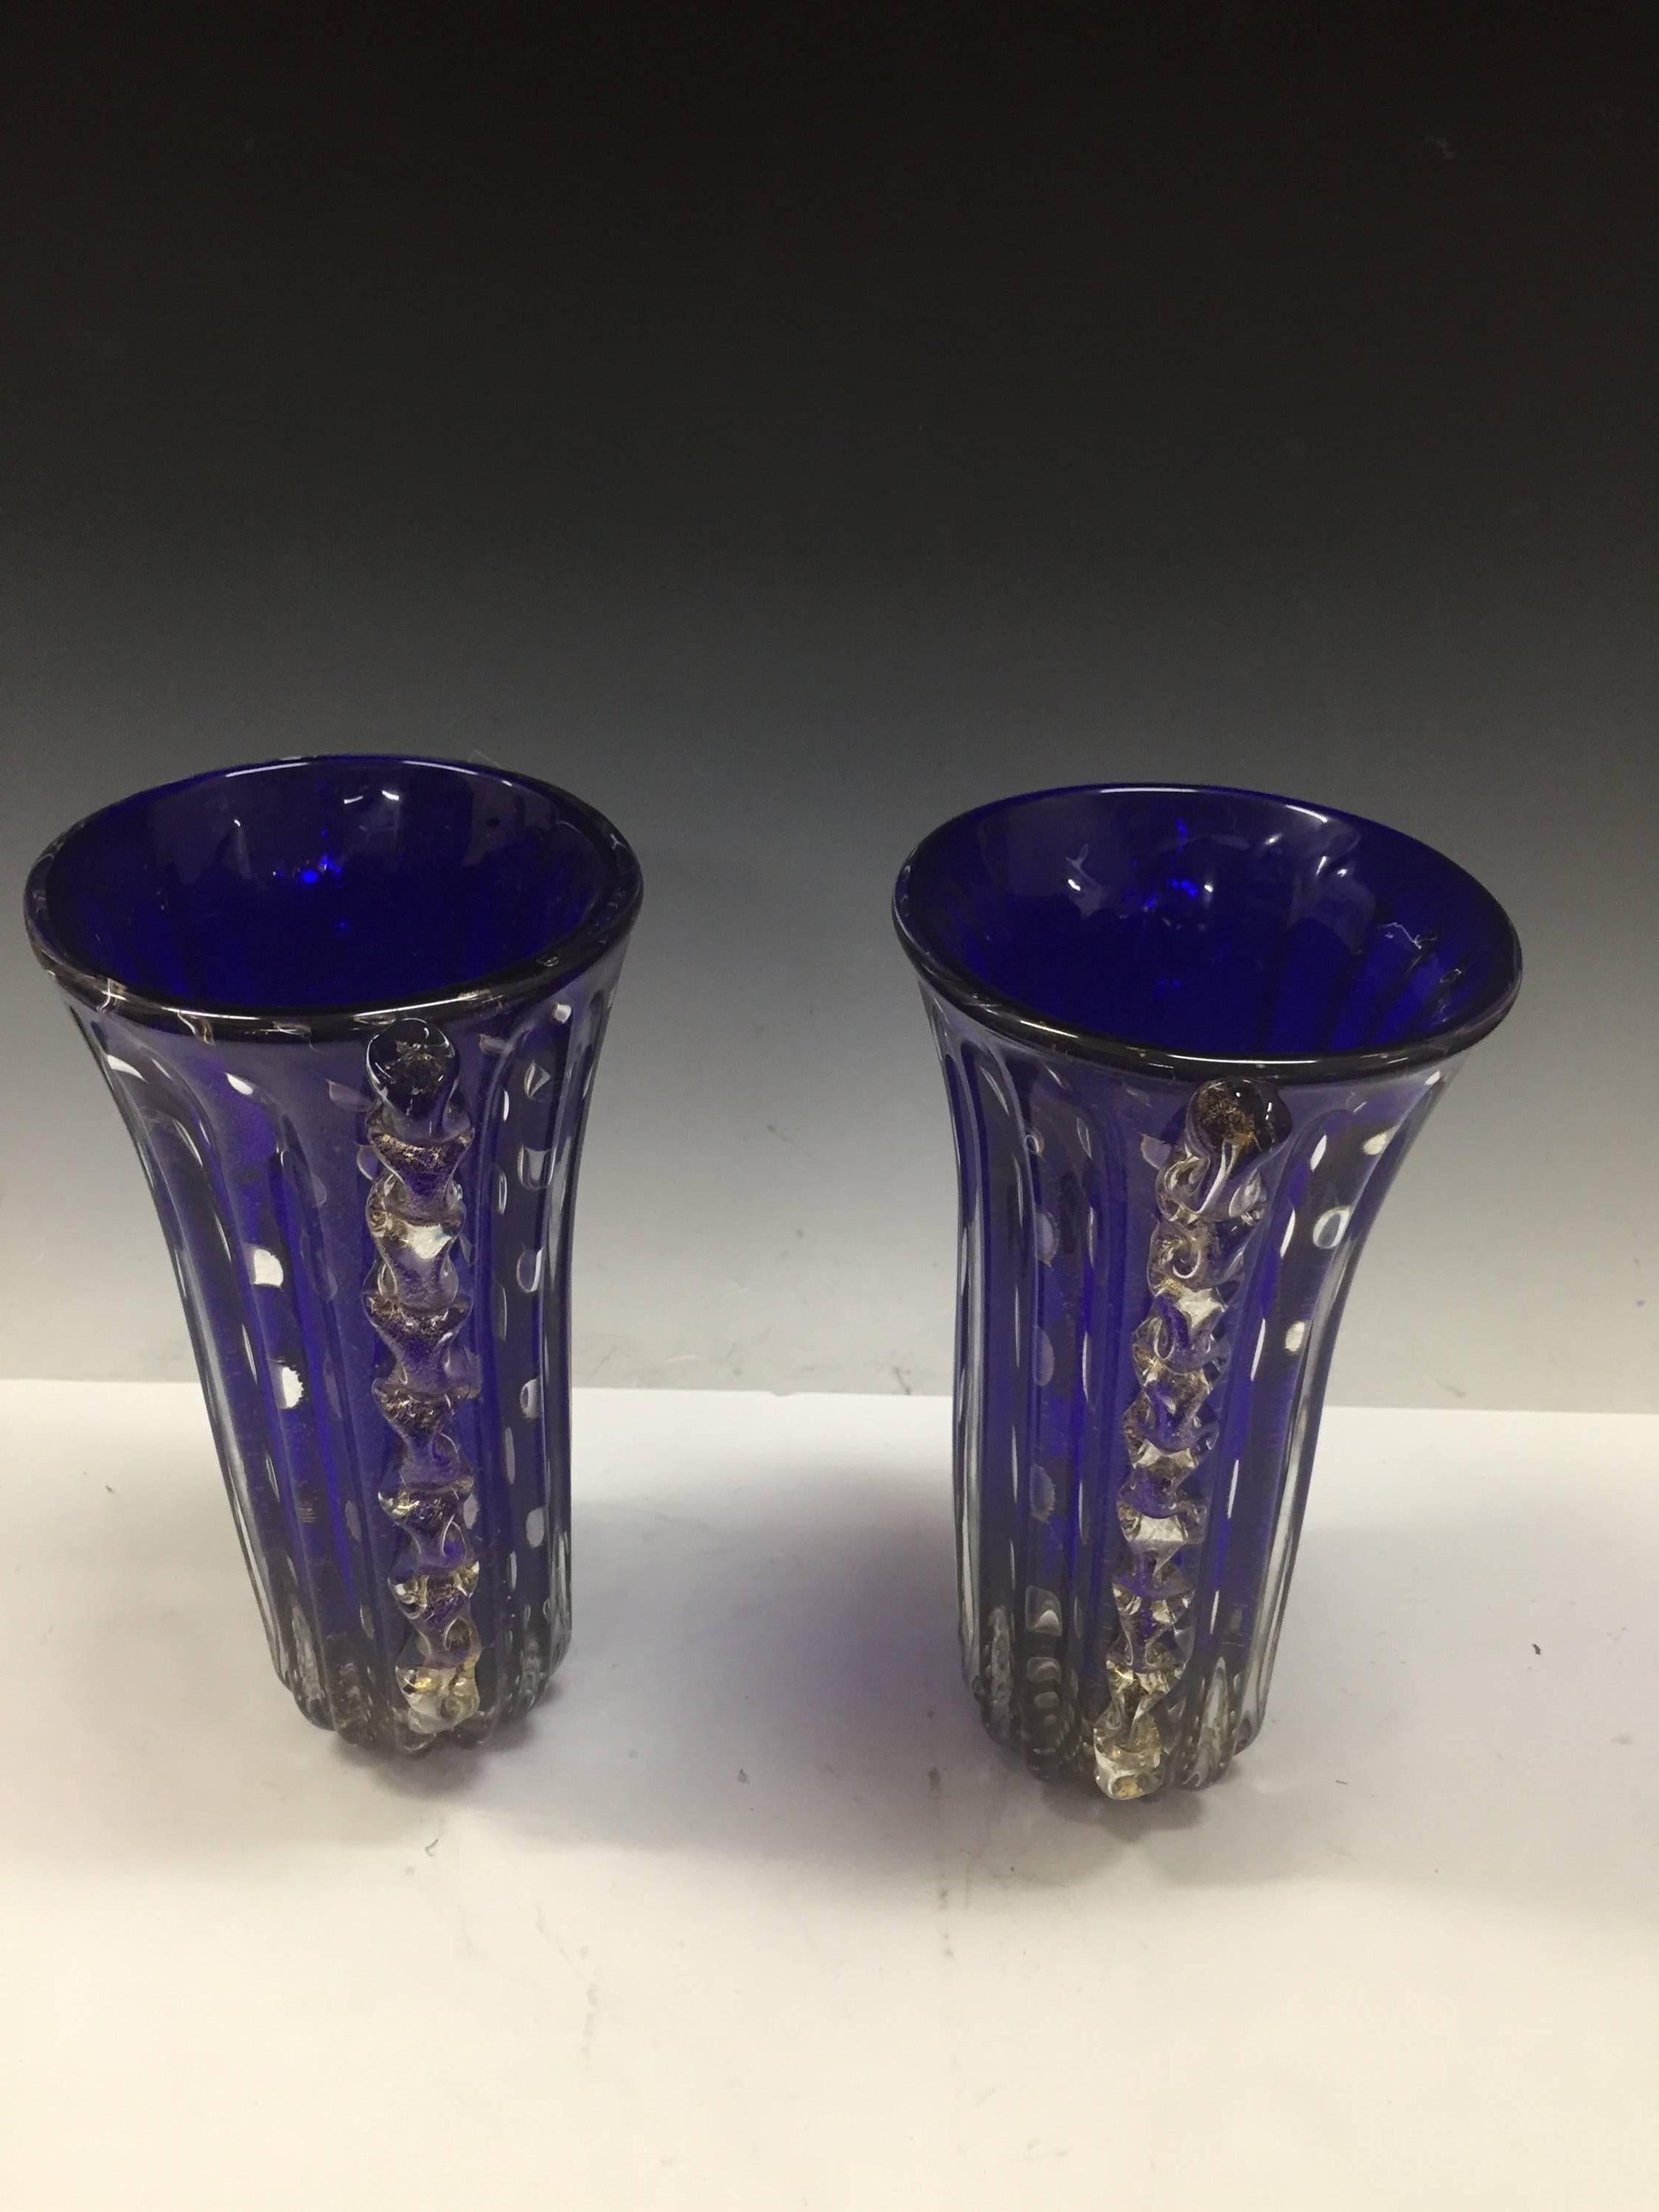 Pair of Cobalt Blue Italian Murano Glass Barovier & Toso Vases with Infused Gold In Good Condition For Sale In Mount Penn, PA